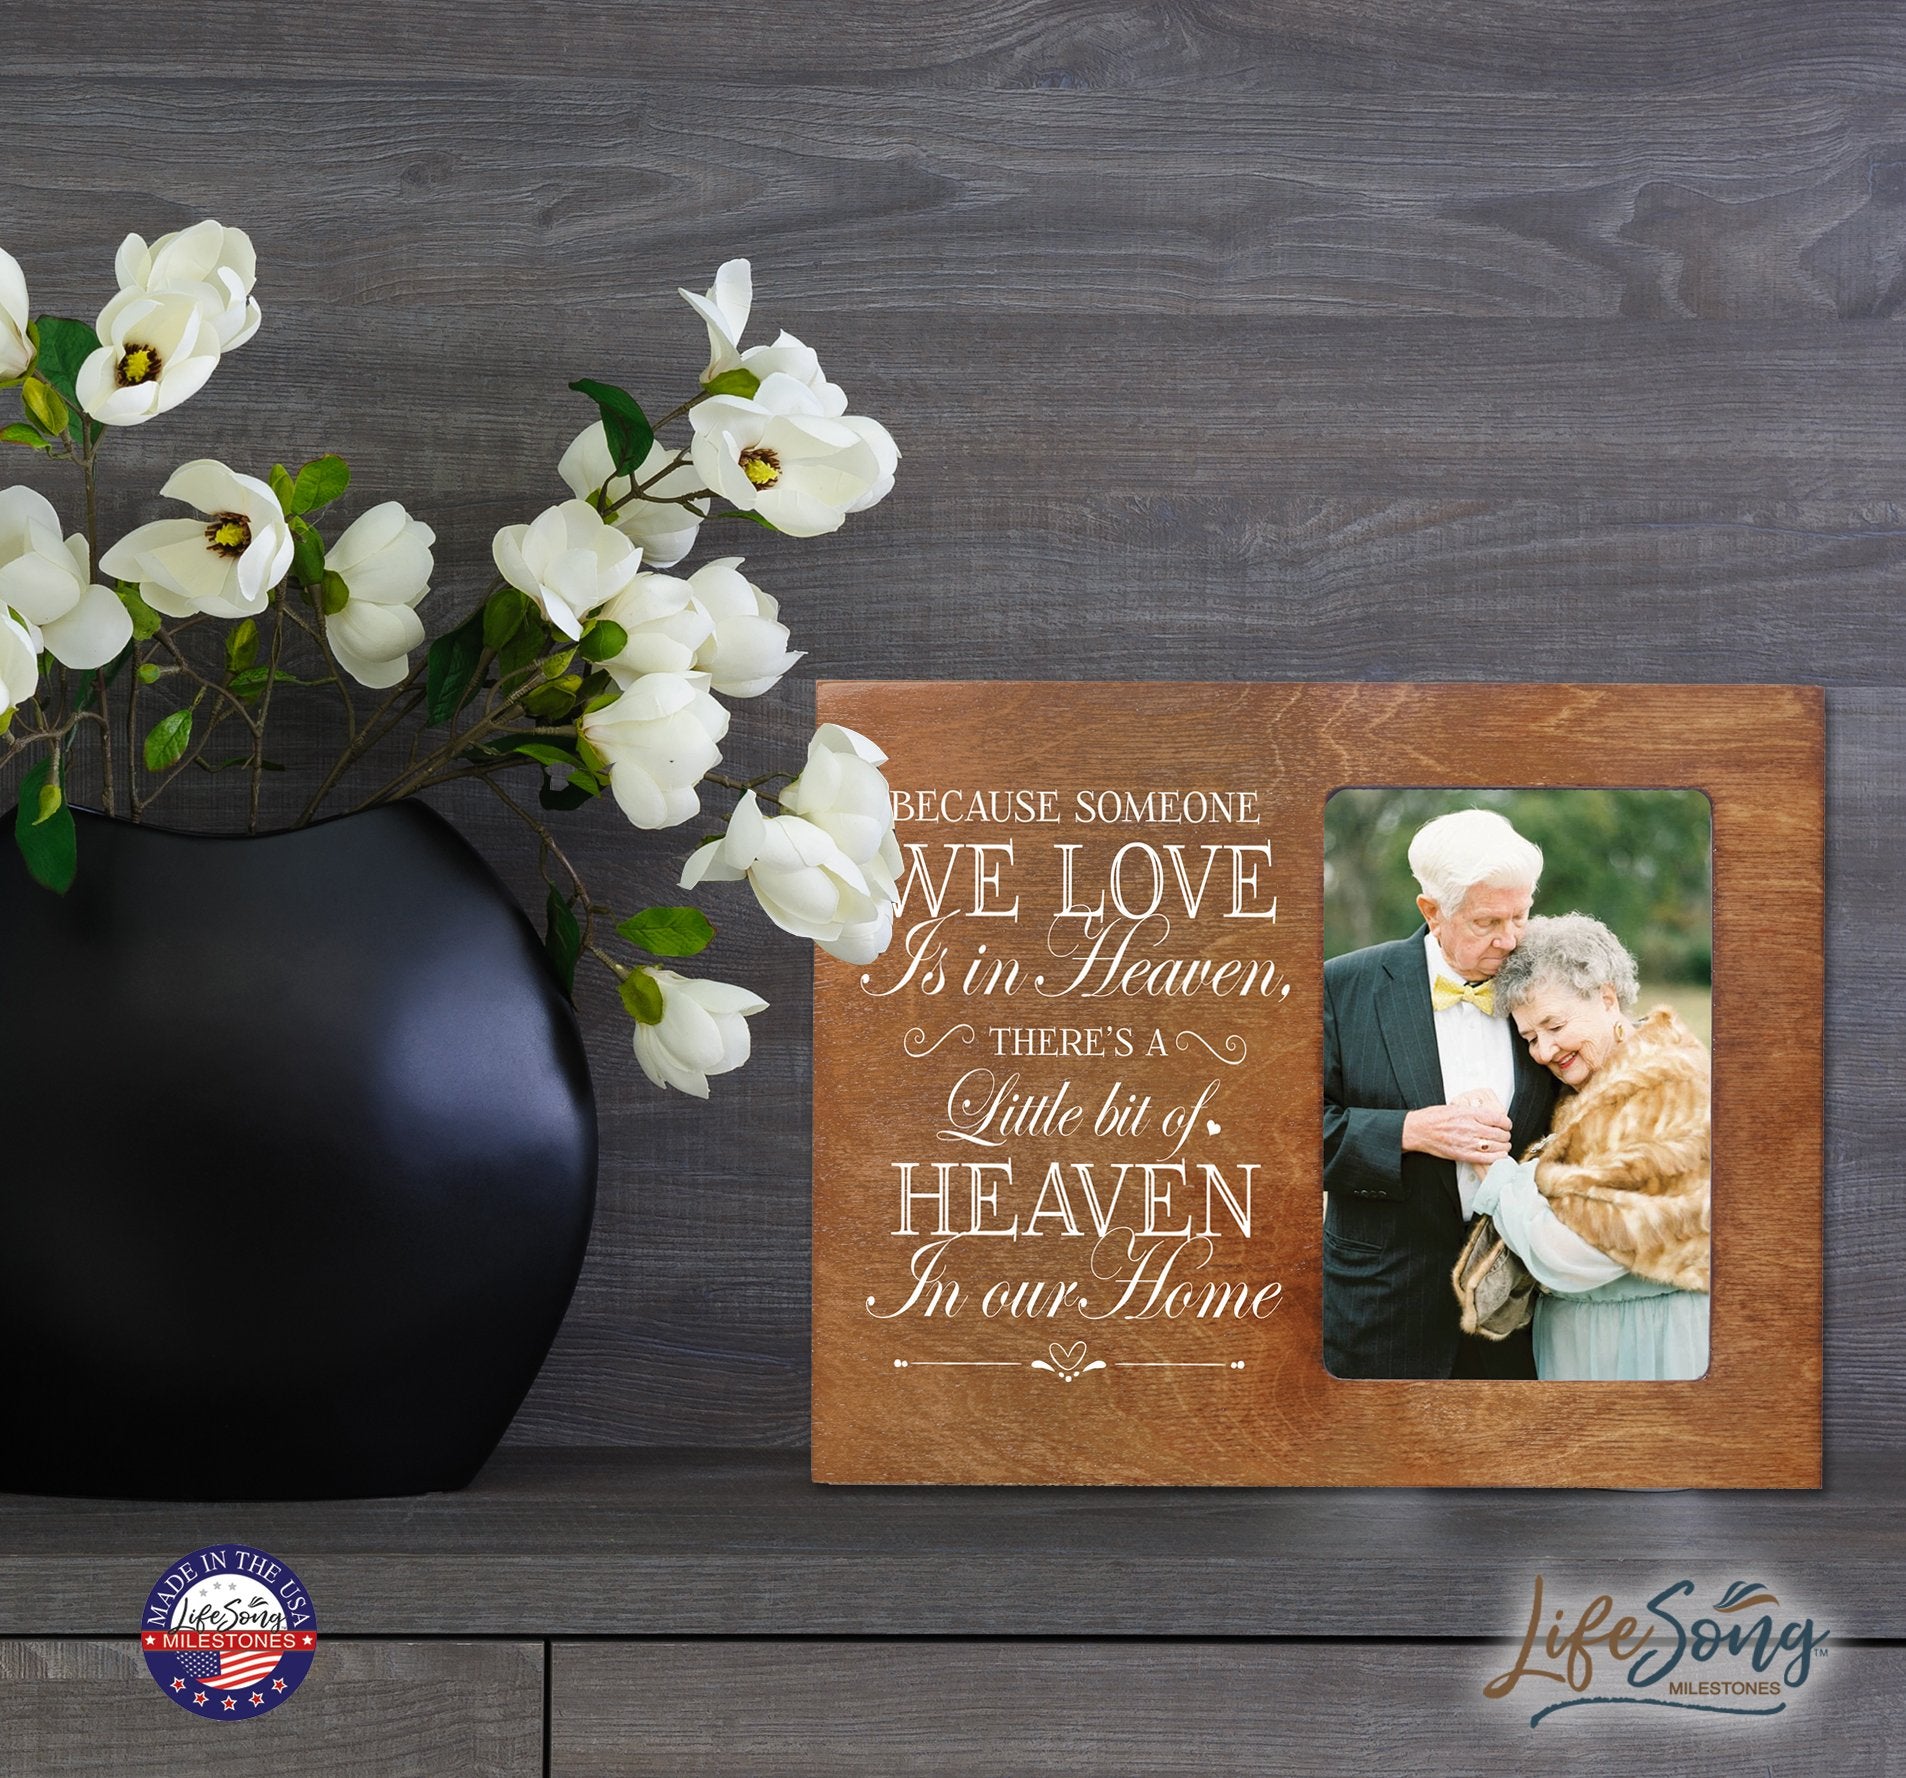 LifeSong Milestones Memorial Picture Frame - Bereavement Sympathy Gift for Loss of Loved One 8” x 10” Photo Frame Holds 4” x 6” Photo